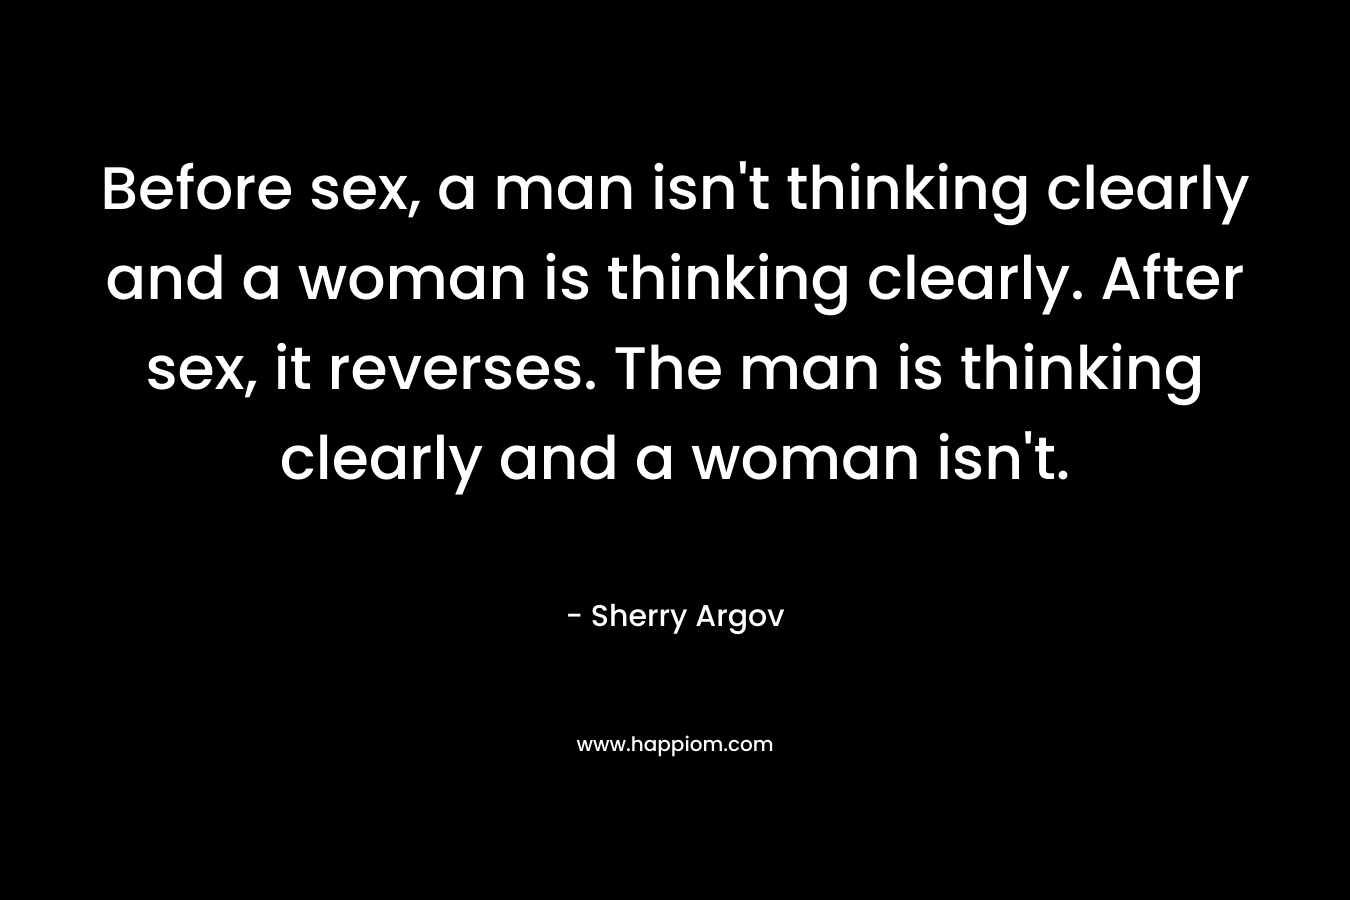 Before sex, a man isn't thinking clearly and a woman is thinking clearly. After sex, it reverses. The man is thinking clearly and a woman isn't.